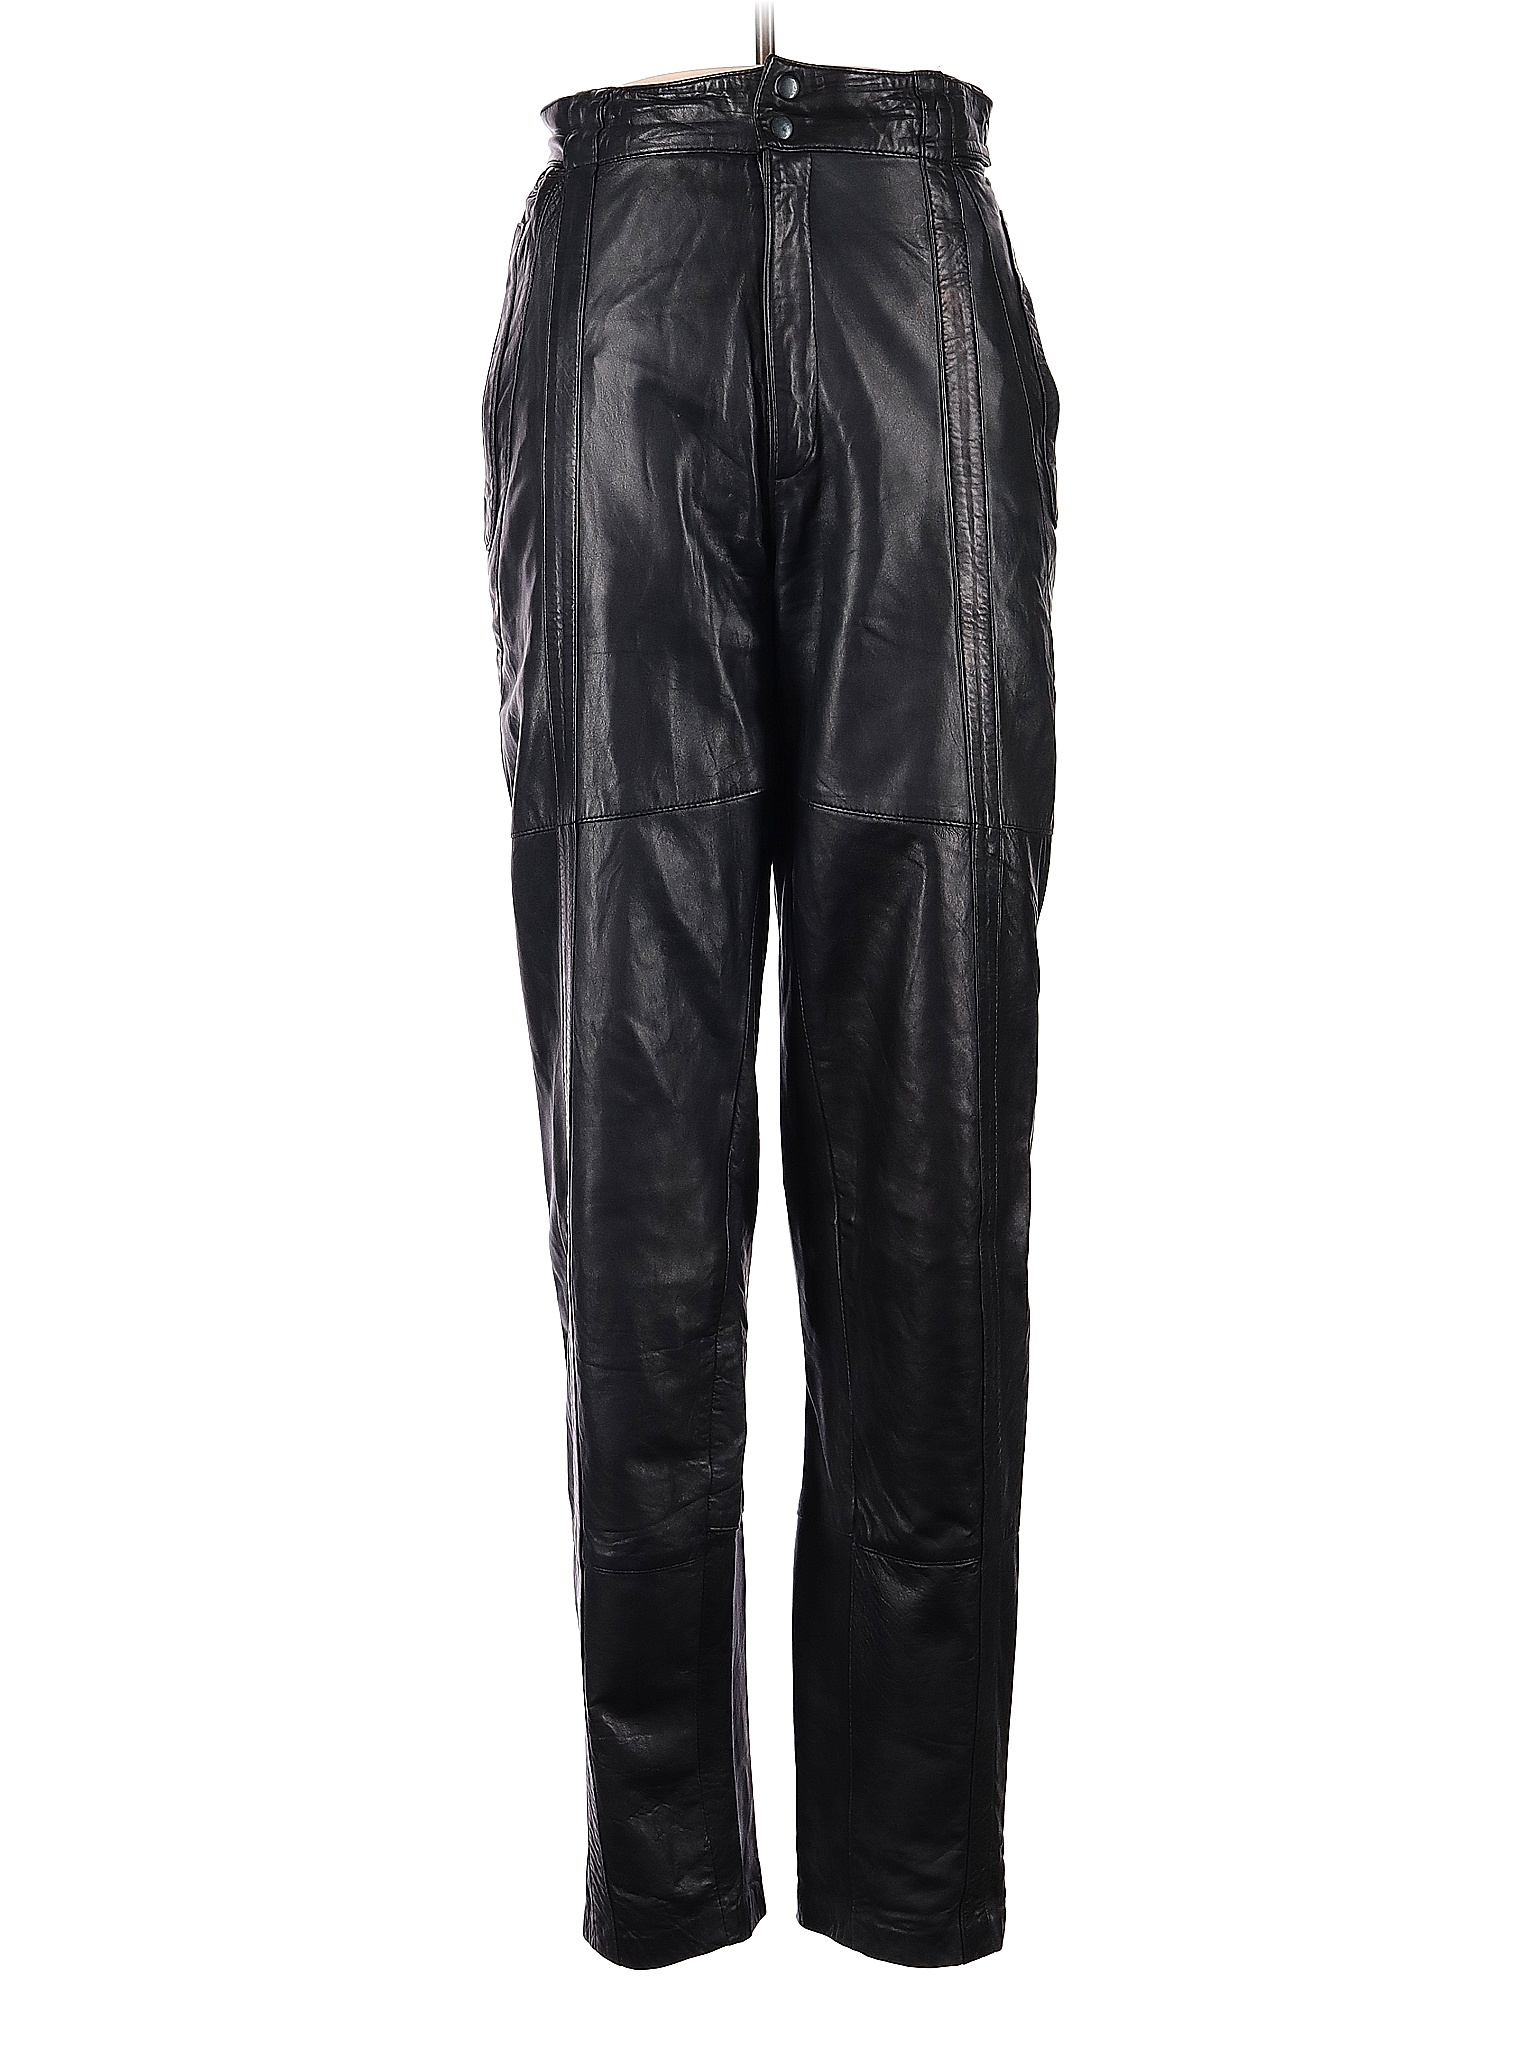 Michael Hoban for North Beach 100% Leather Solid Black Leather Pants ...